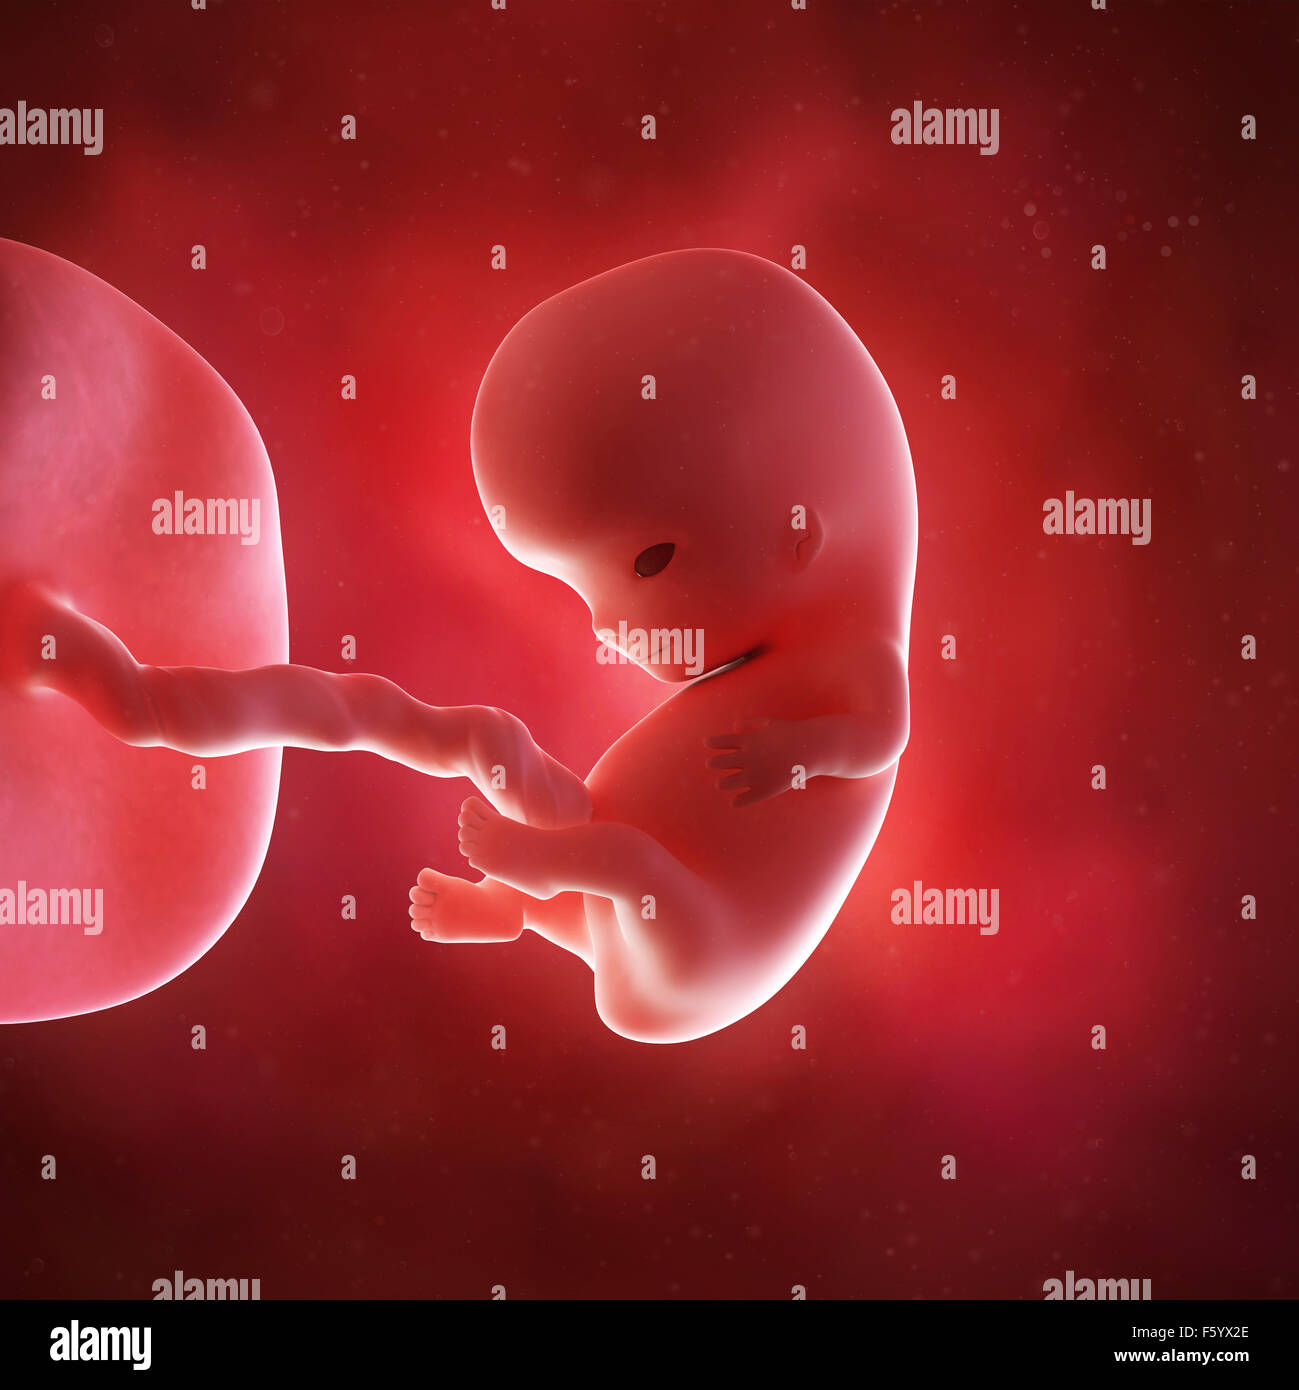 medical accurate 3d illustration of a fetus week 9 Stock Photo